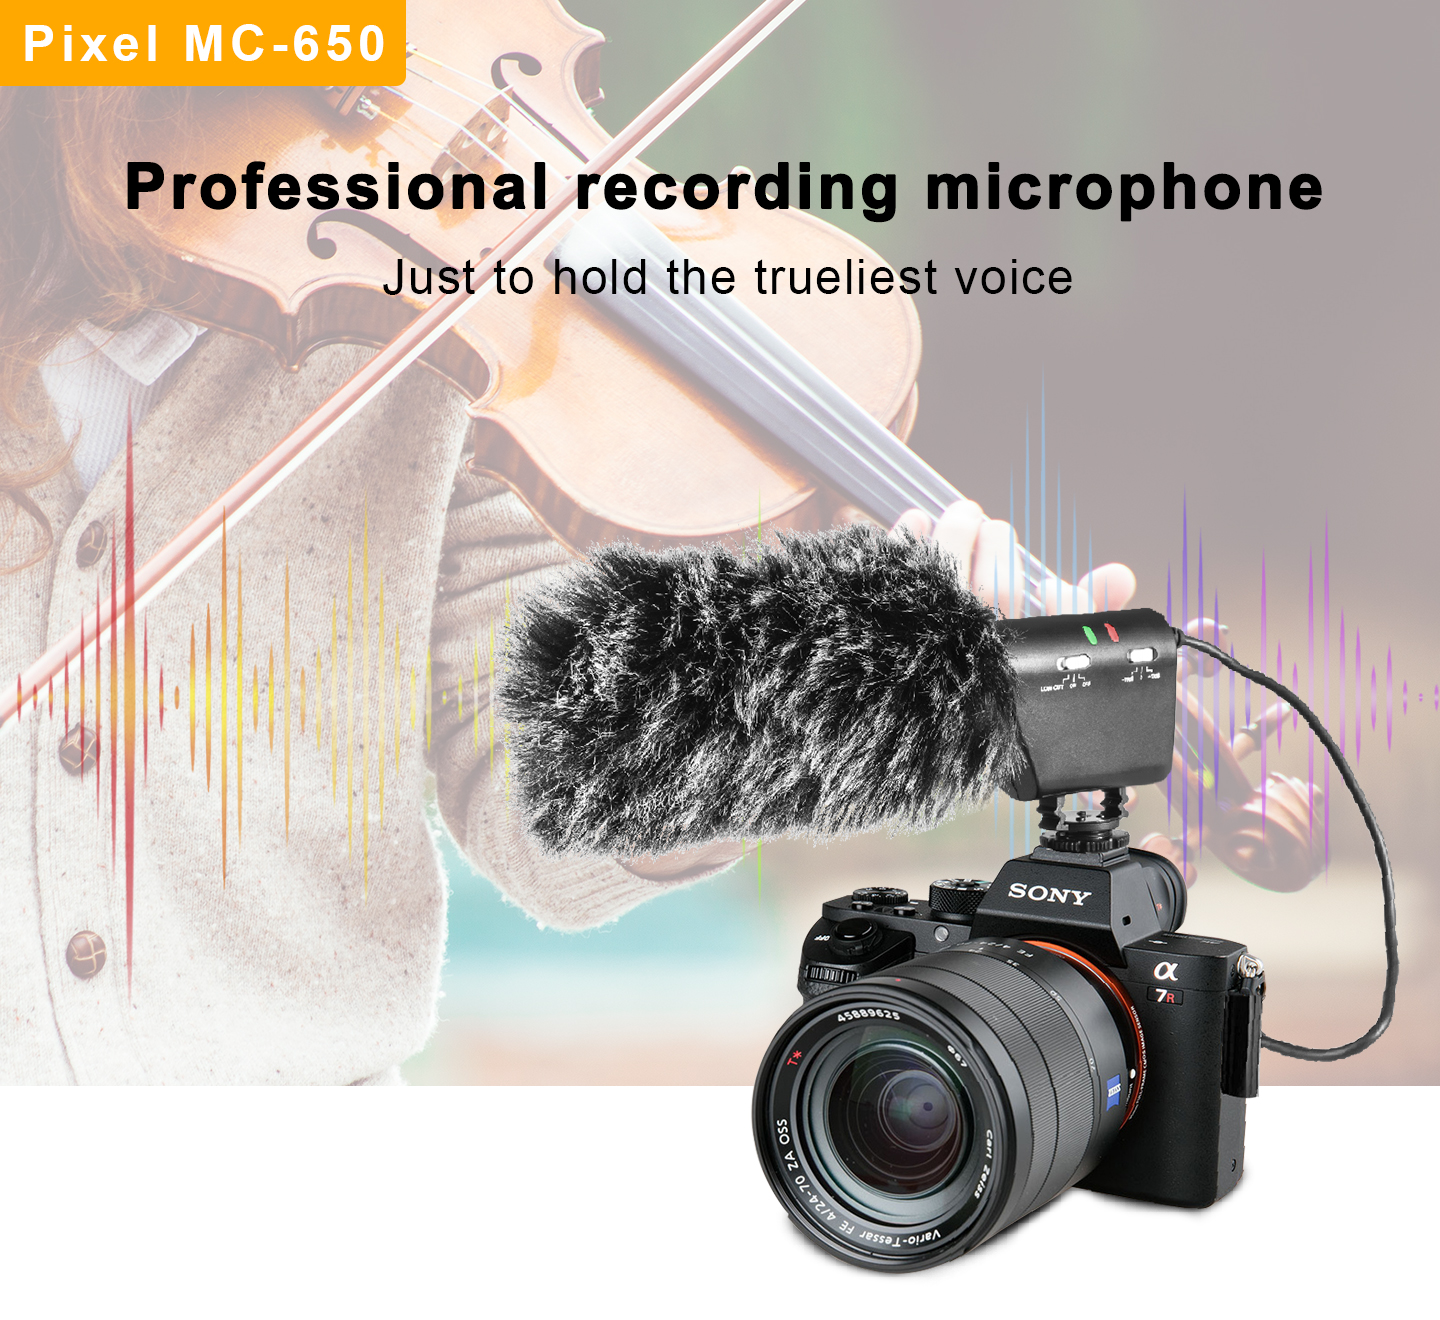 Professional recording microphone